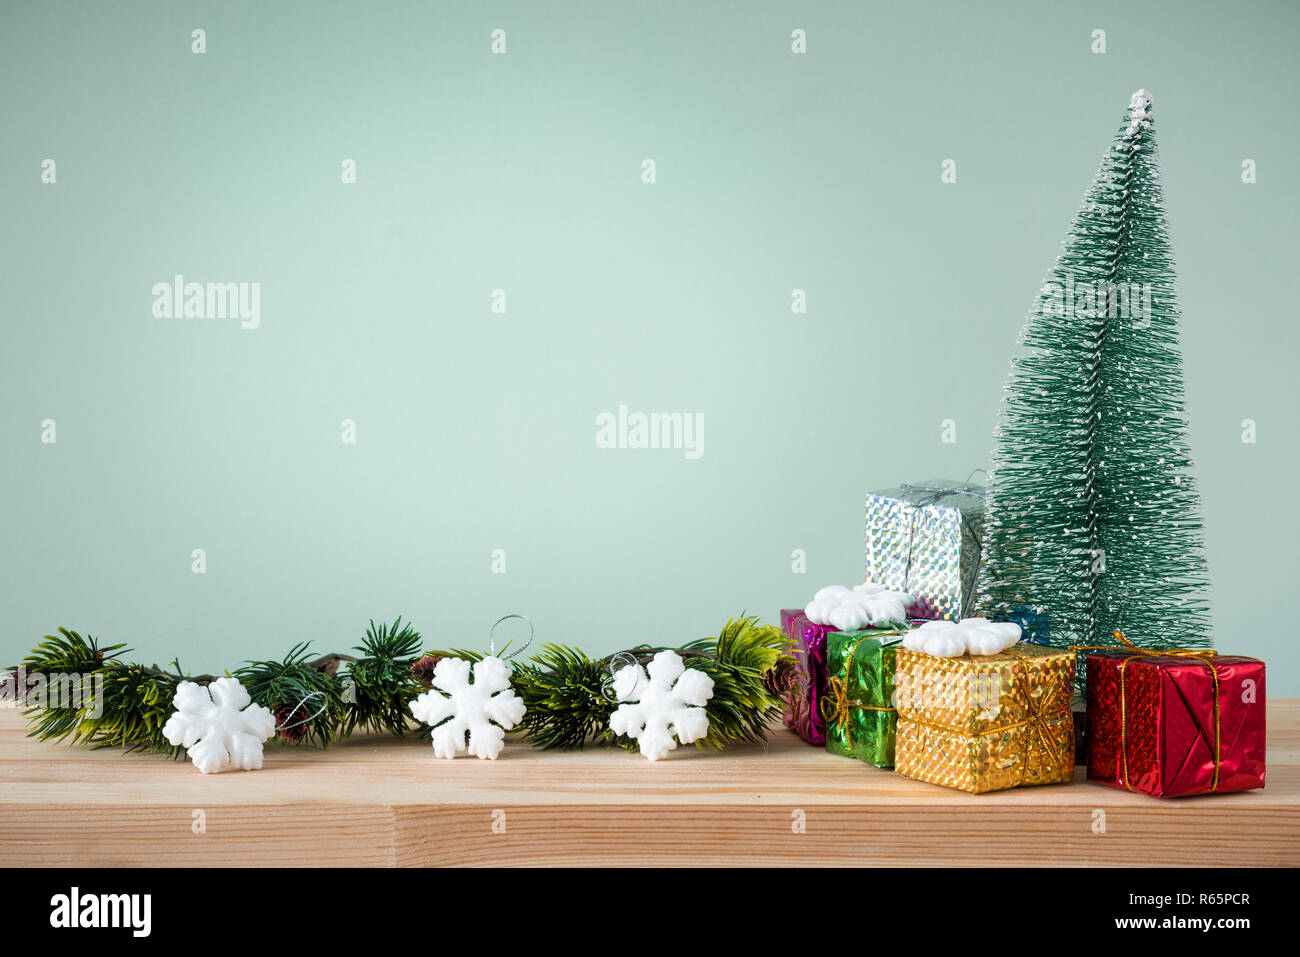 Christmas background 2019 of decorations on the table Stock Photo